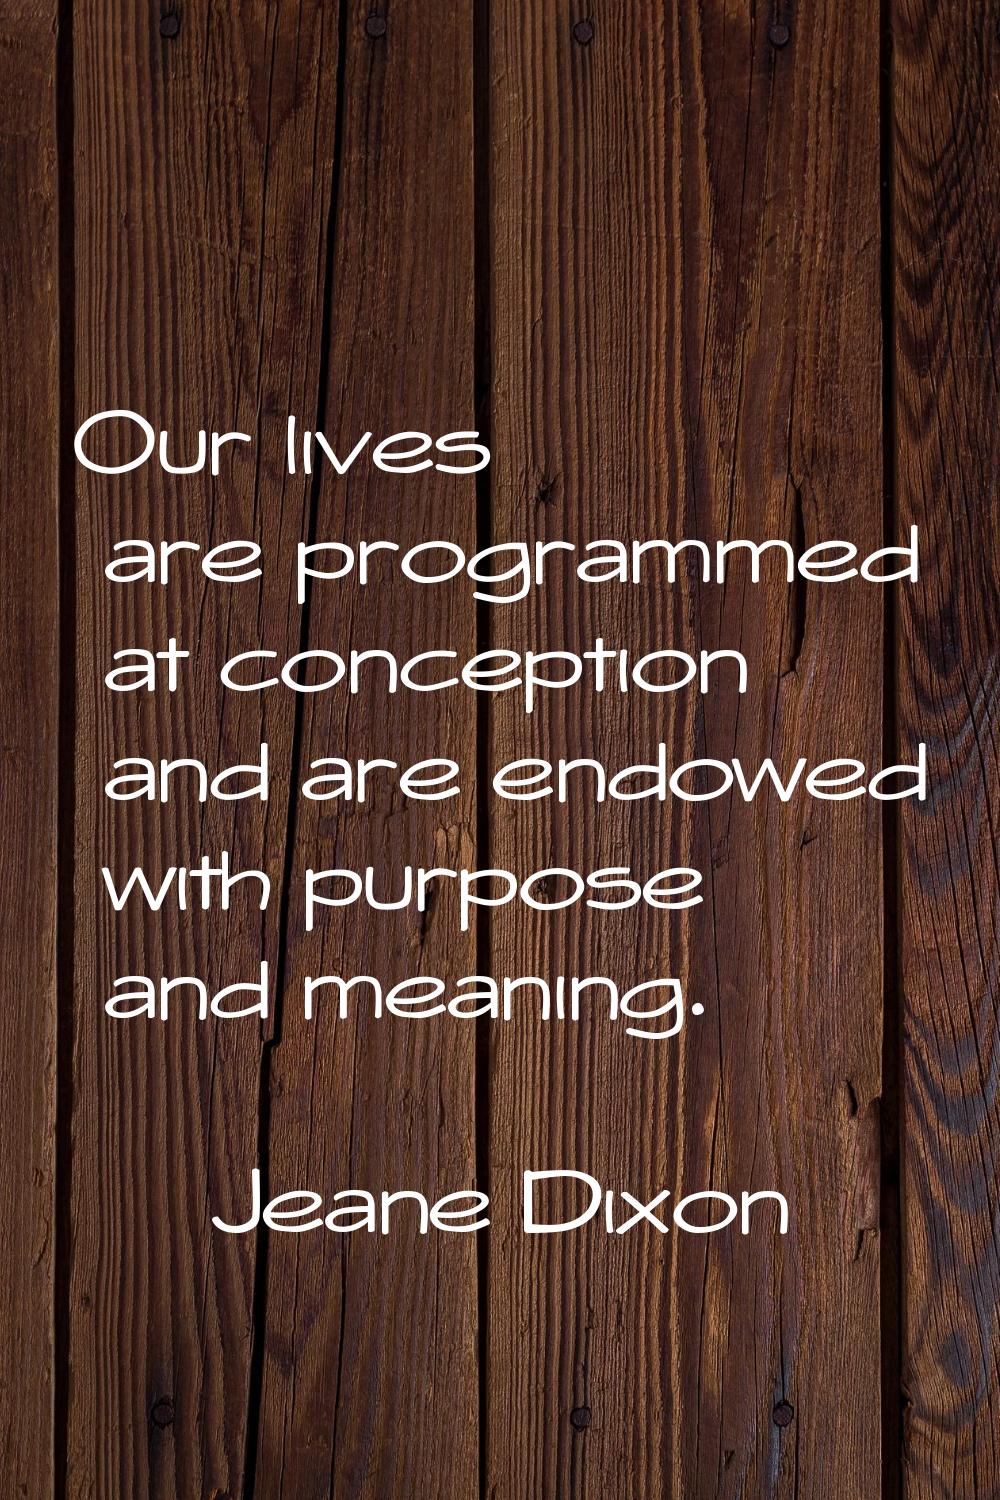 Our lives are programmed at conception and are endowed with purpose and meaning.